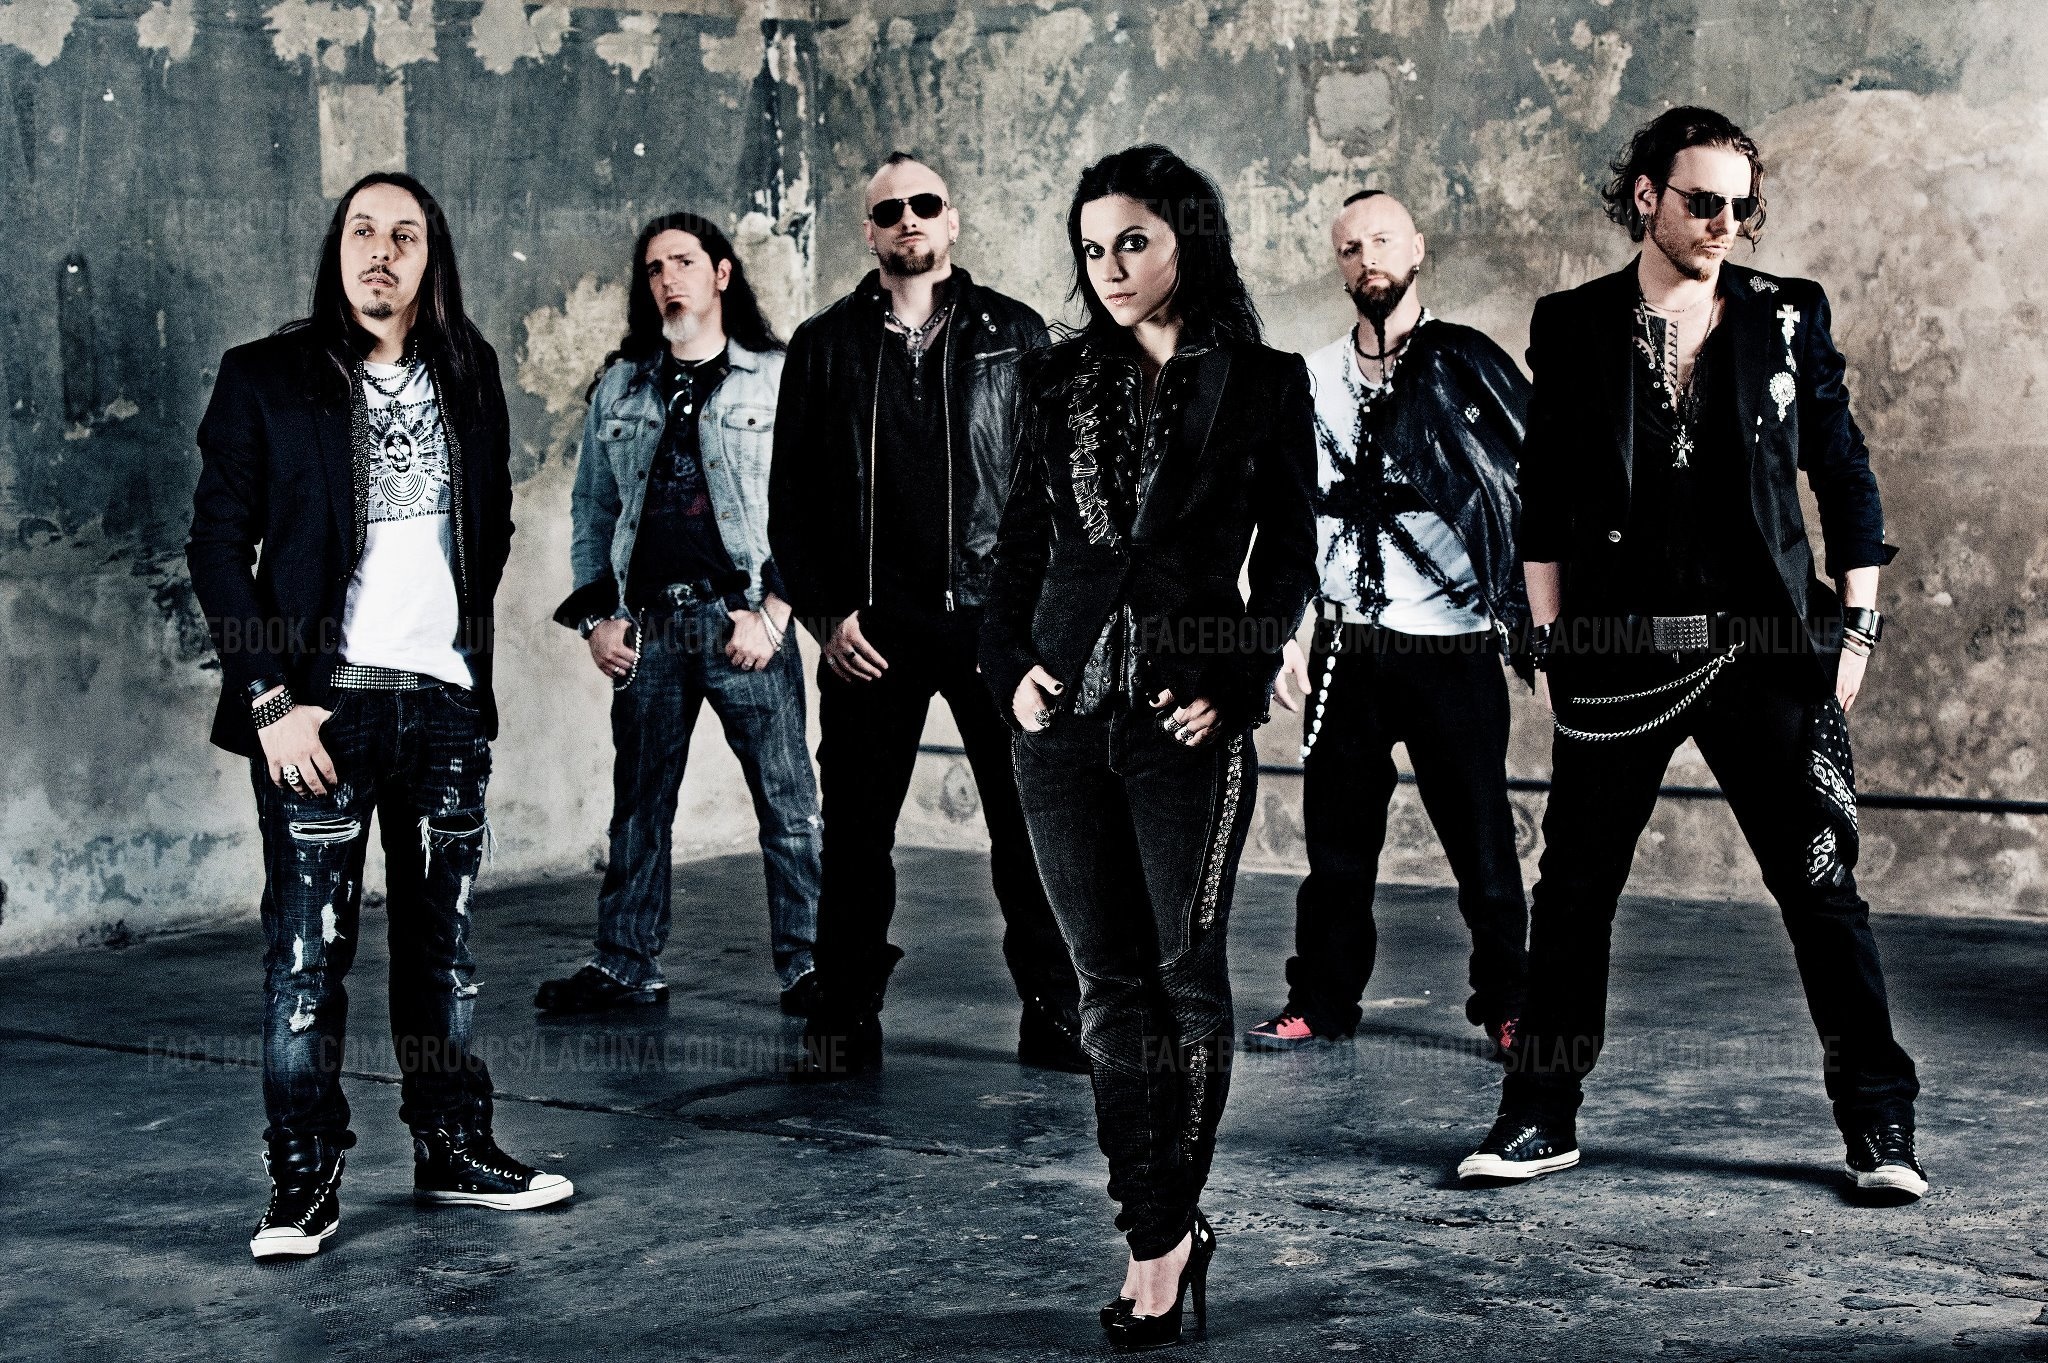 Lacuna Coil, HD wallpaper, Music background image, Gothic metal band, 2050x1370 HD Desktop